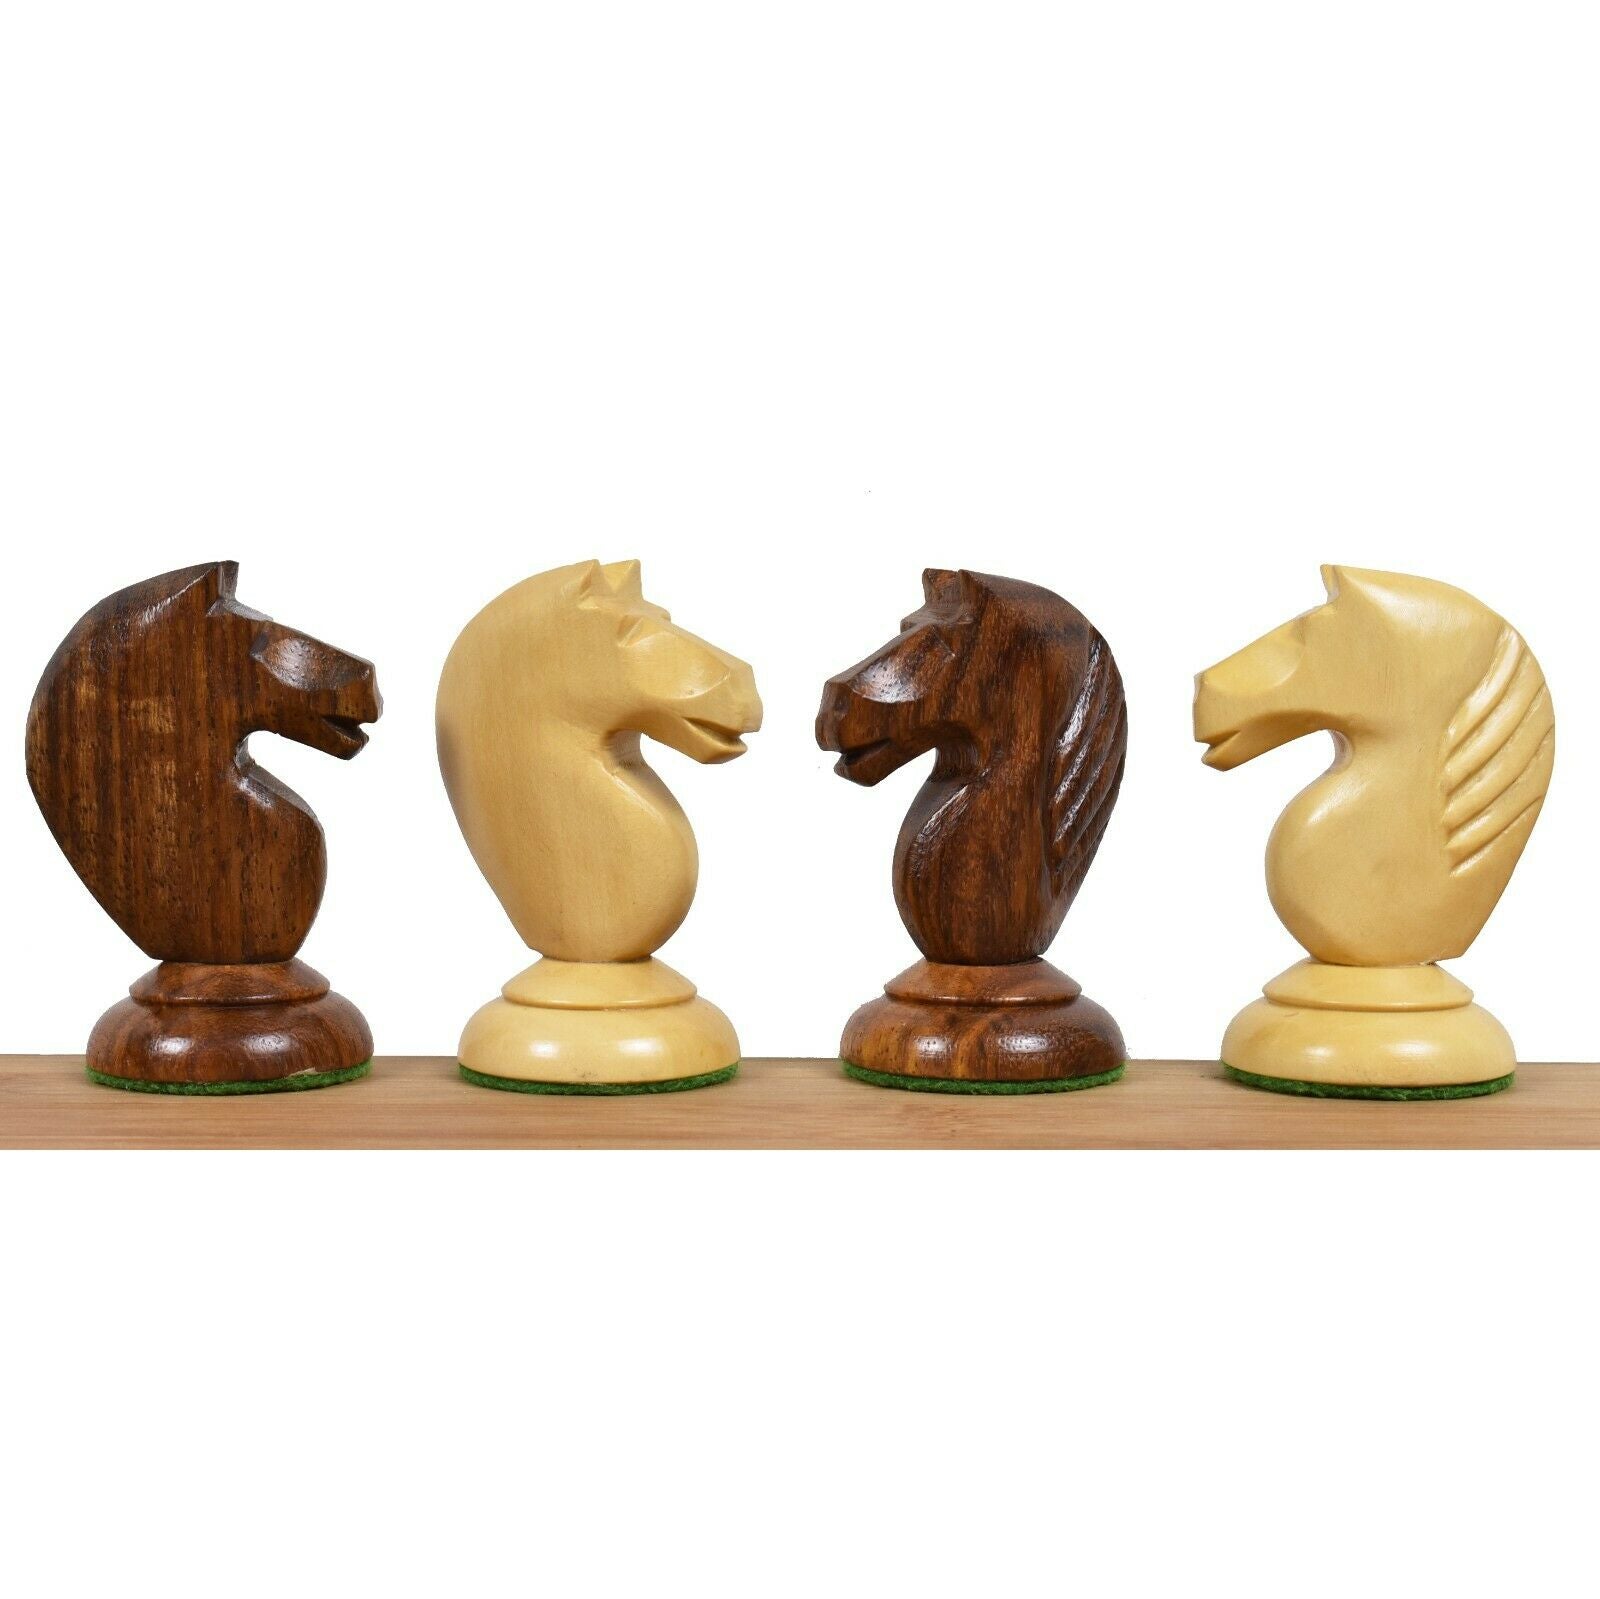 Buy Antique Reproduction Chess Pieces | Royal Chess Mall